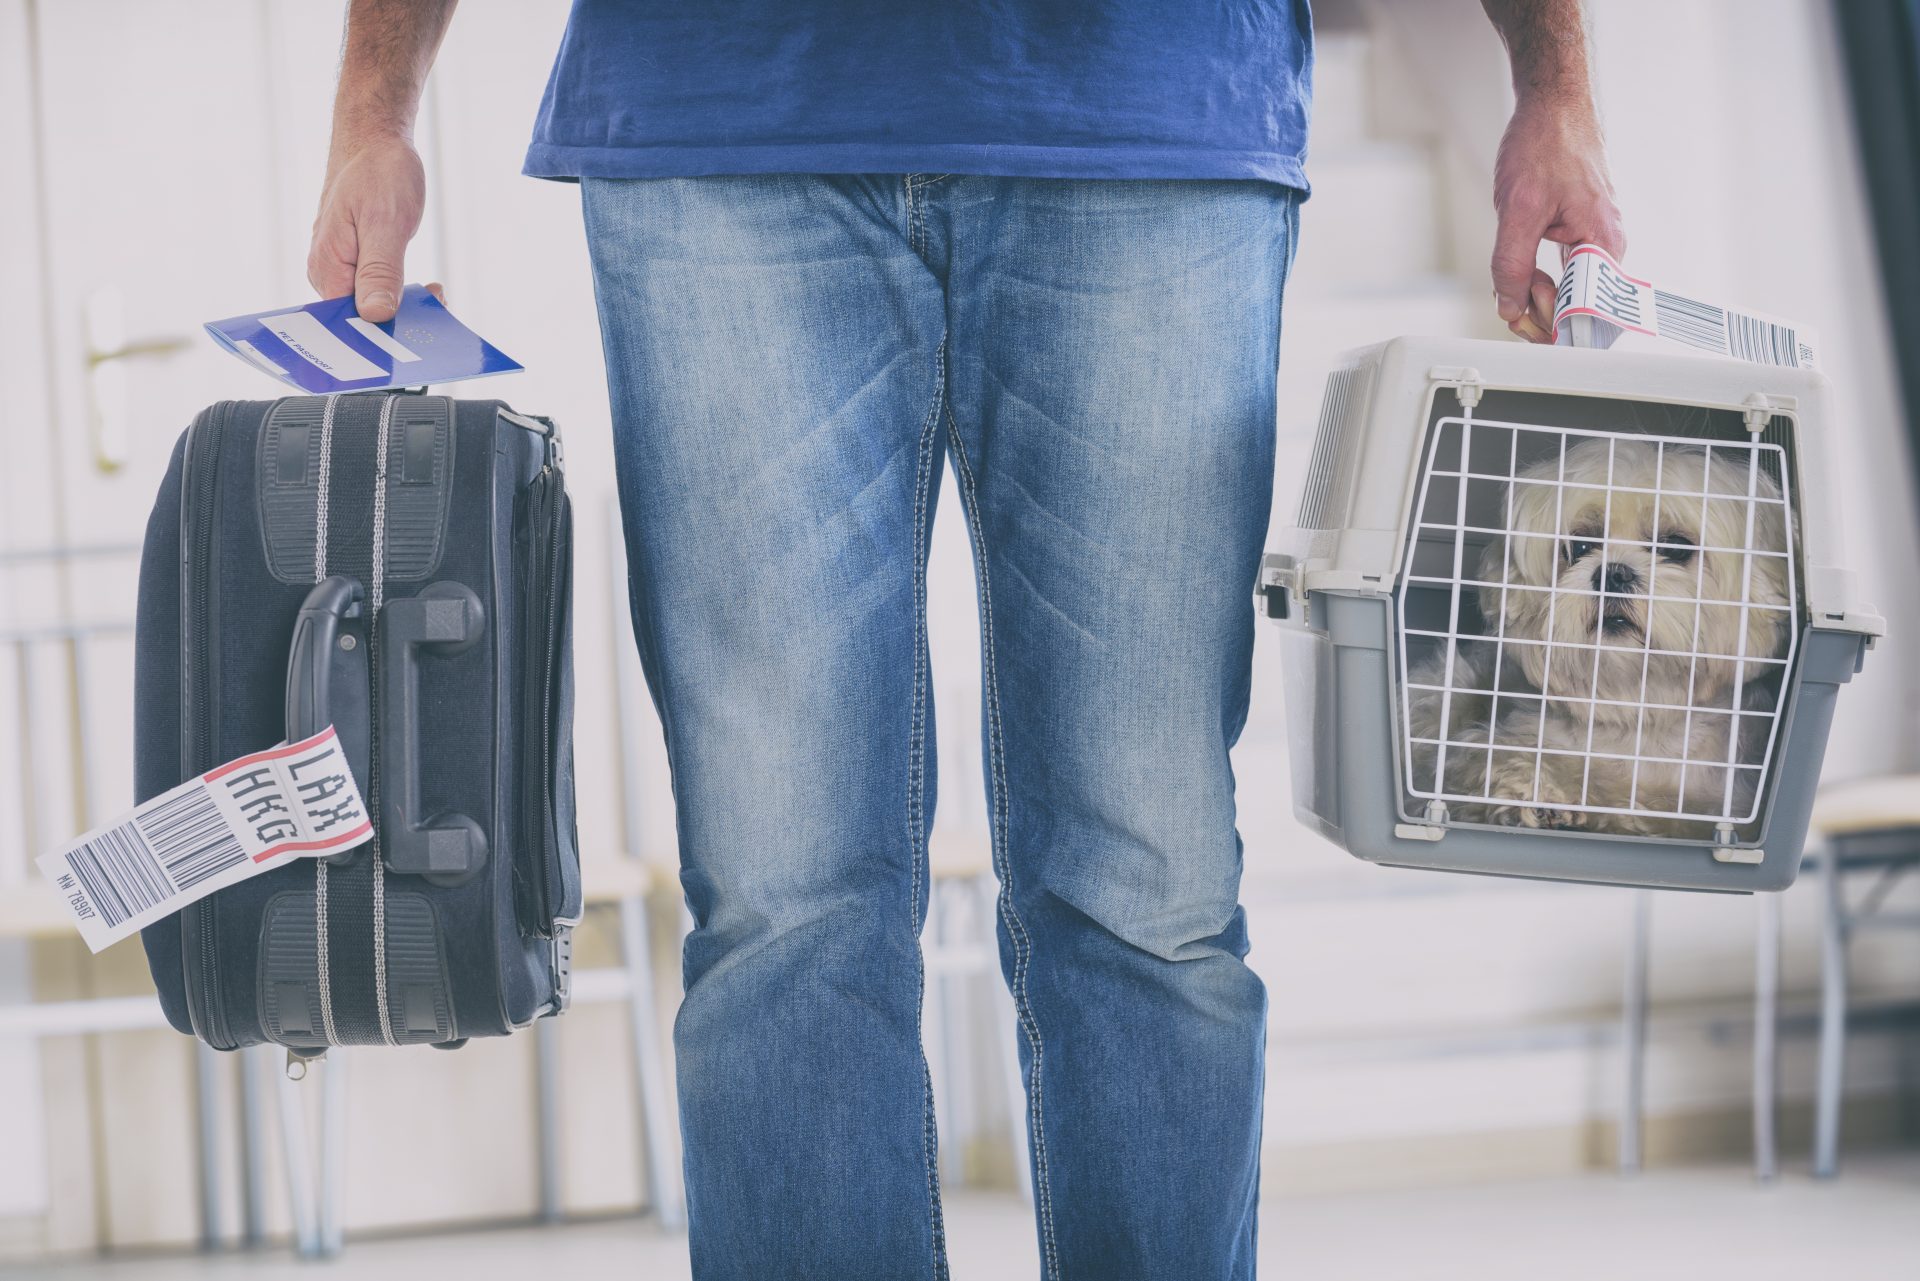 uk gov travel with pets